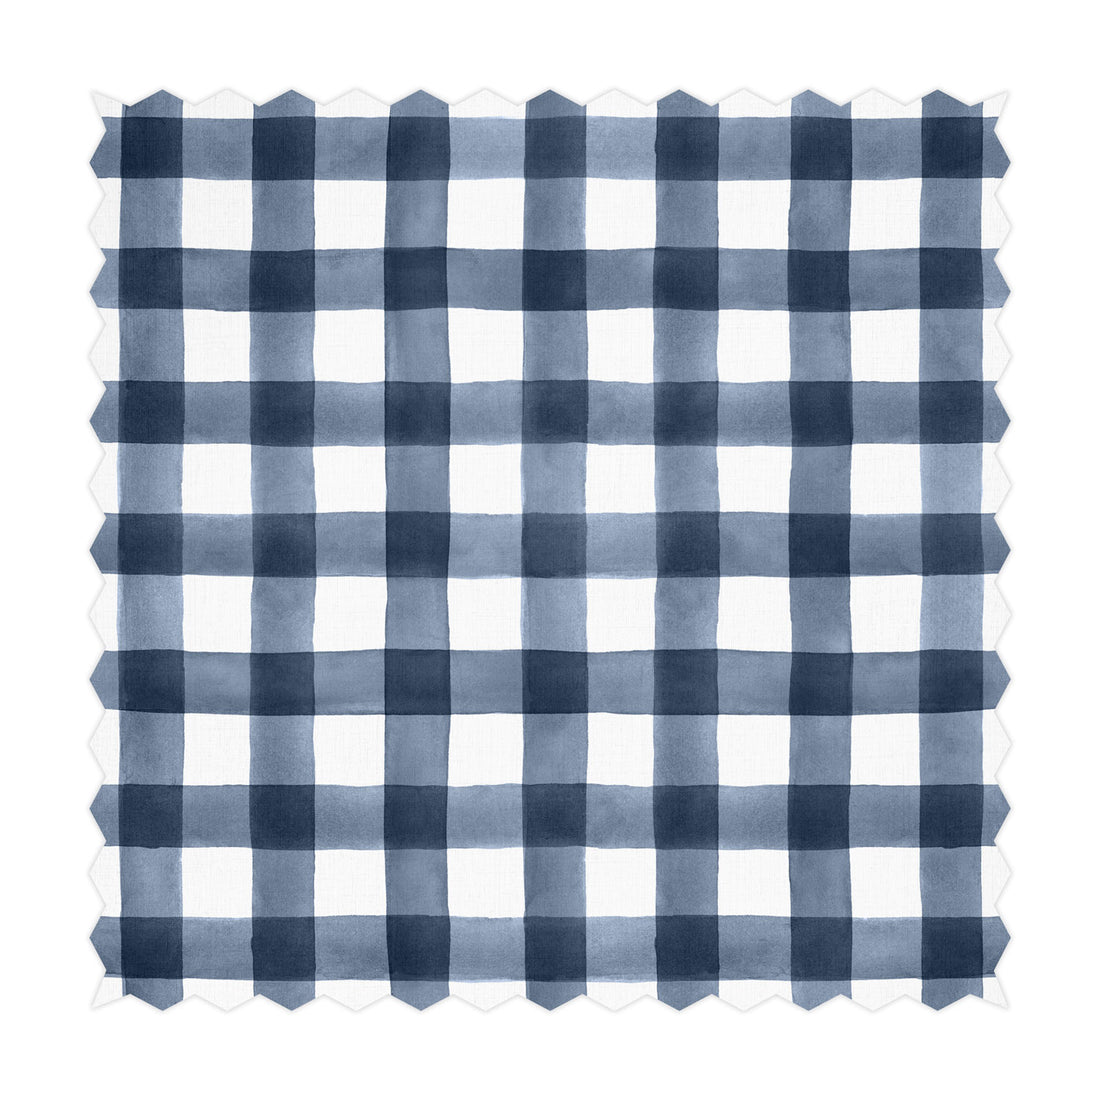 watercolor effect plaid fabric design in blue